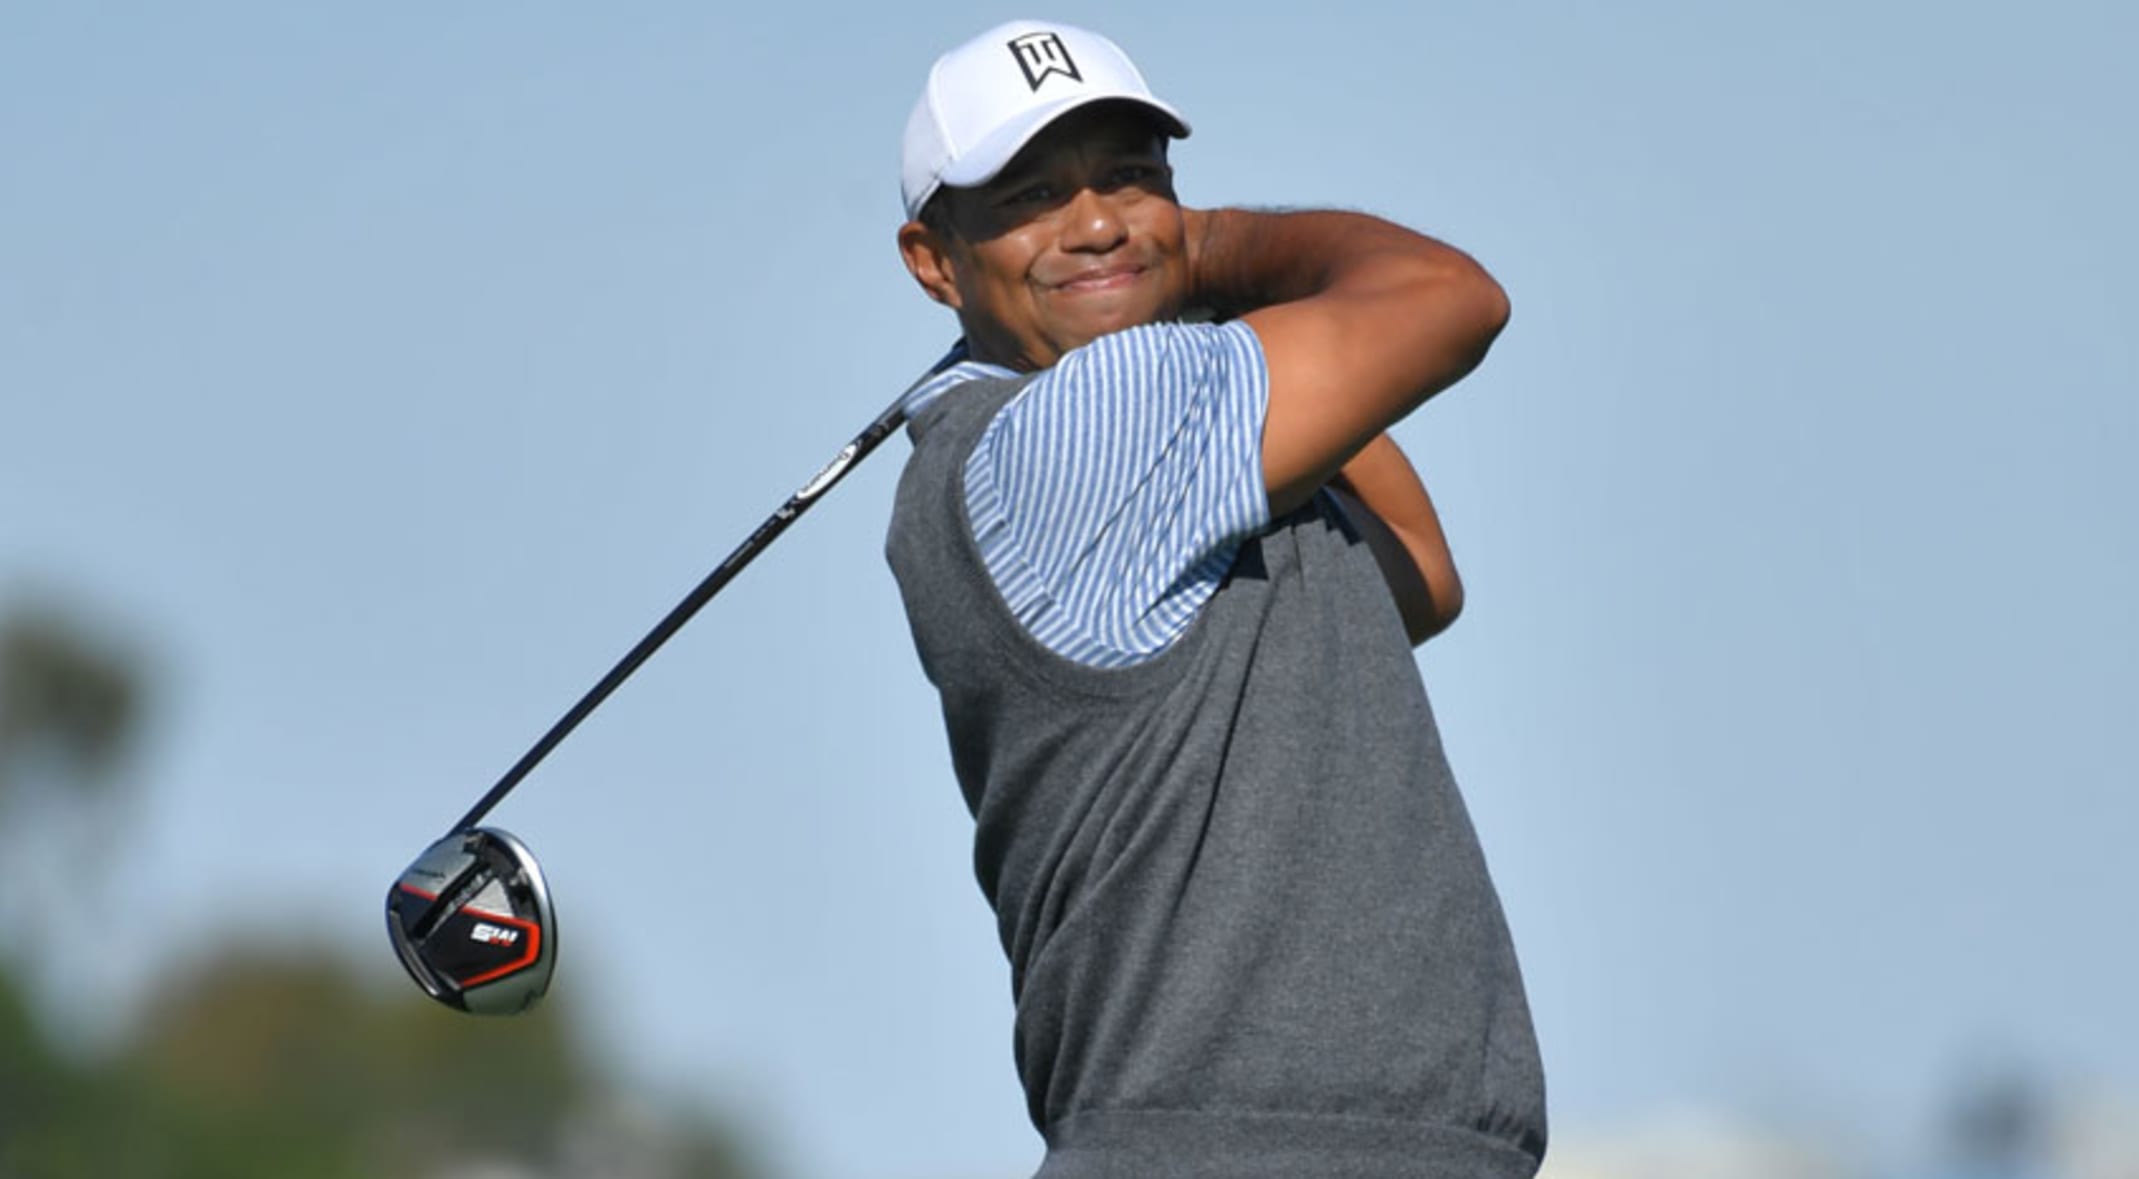 Tiger Woods Cards 71 In Round 3 At Torrey Pines